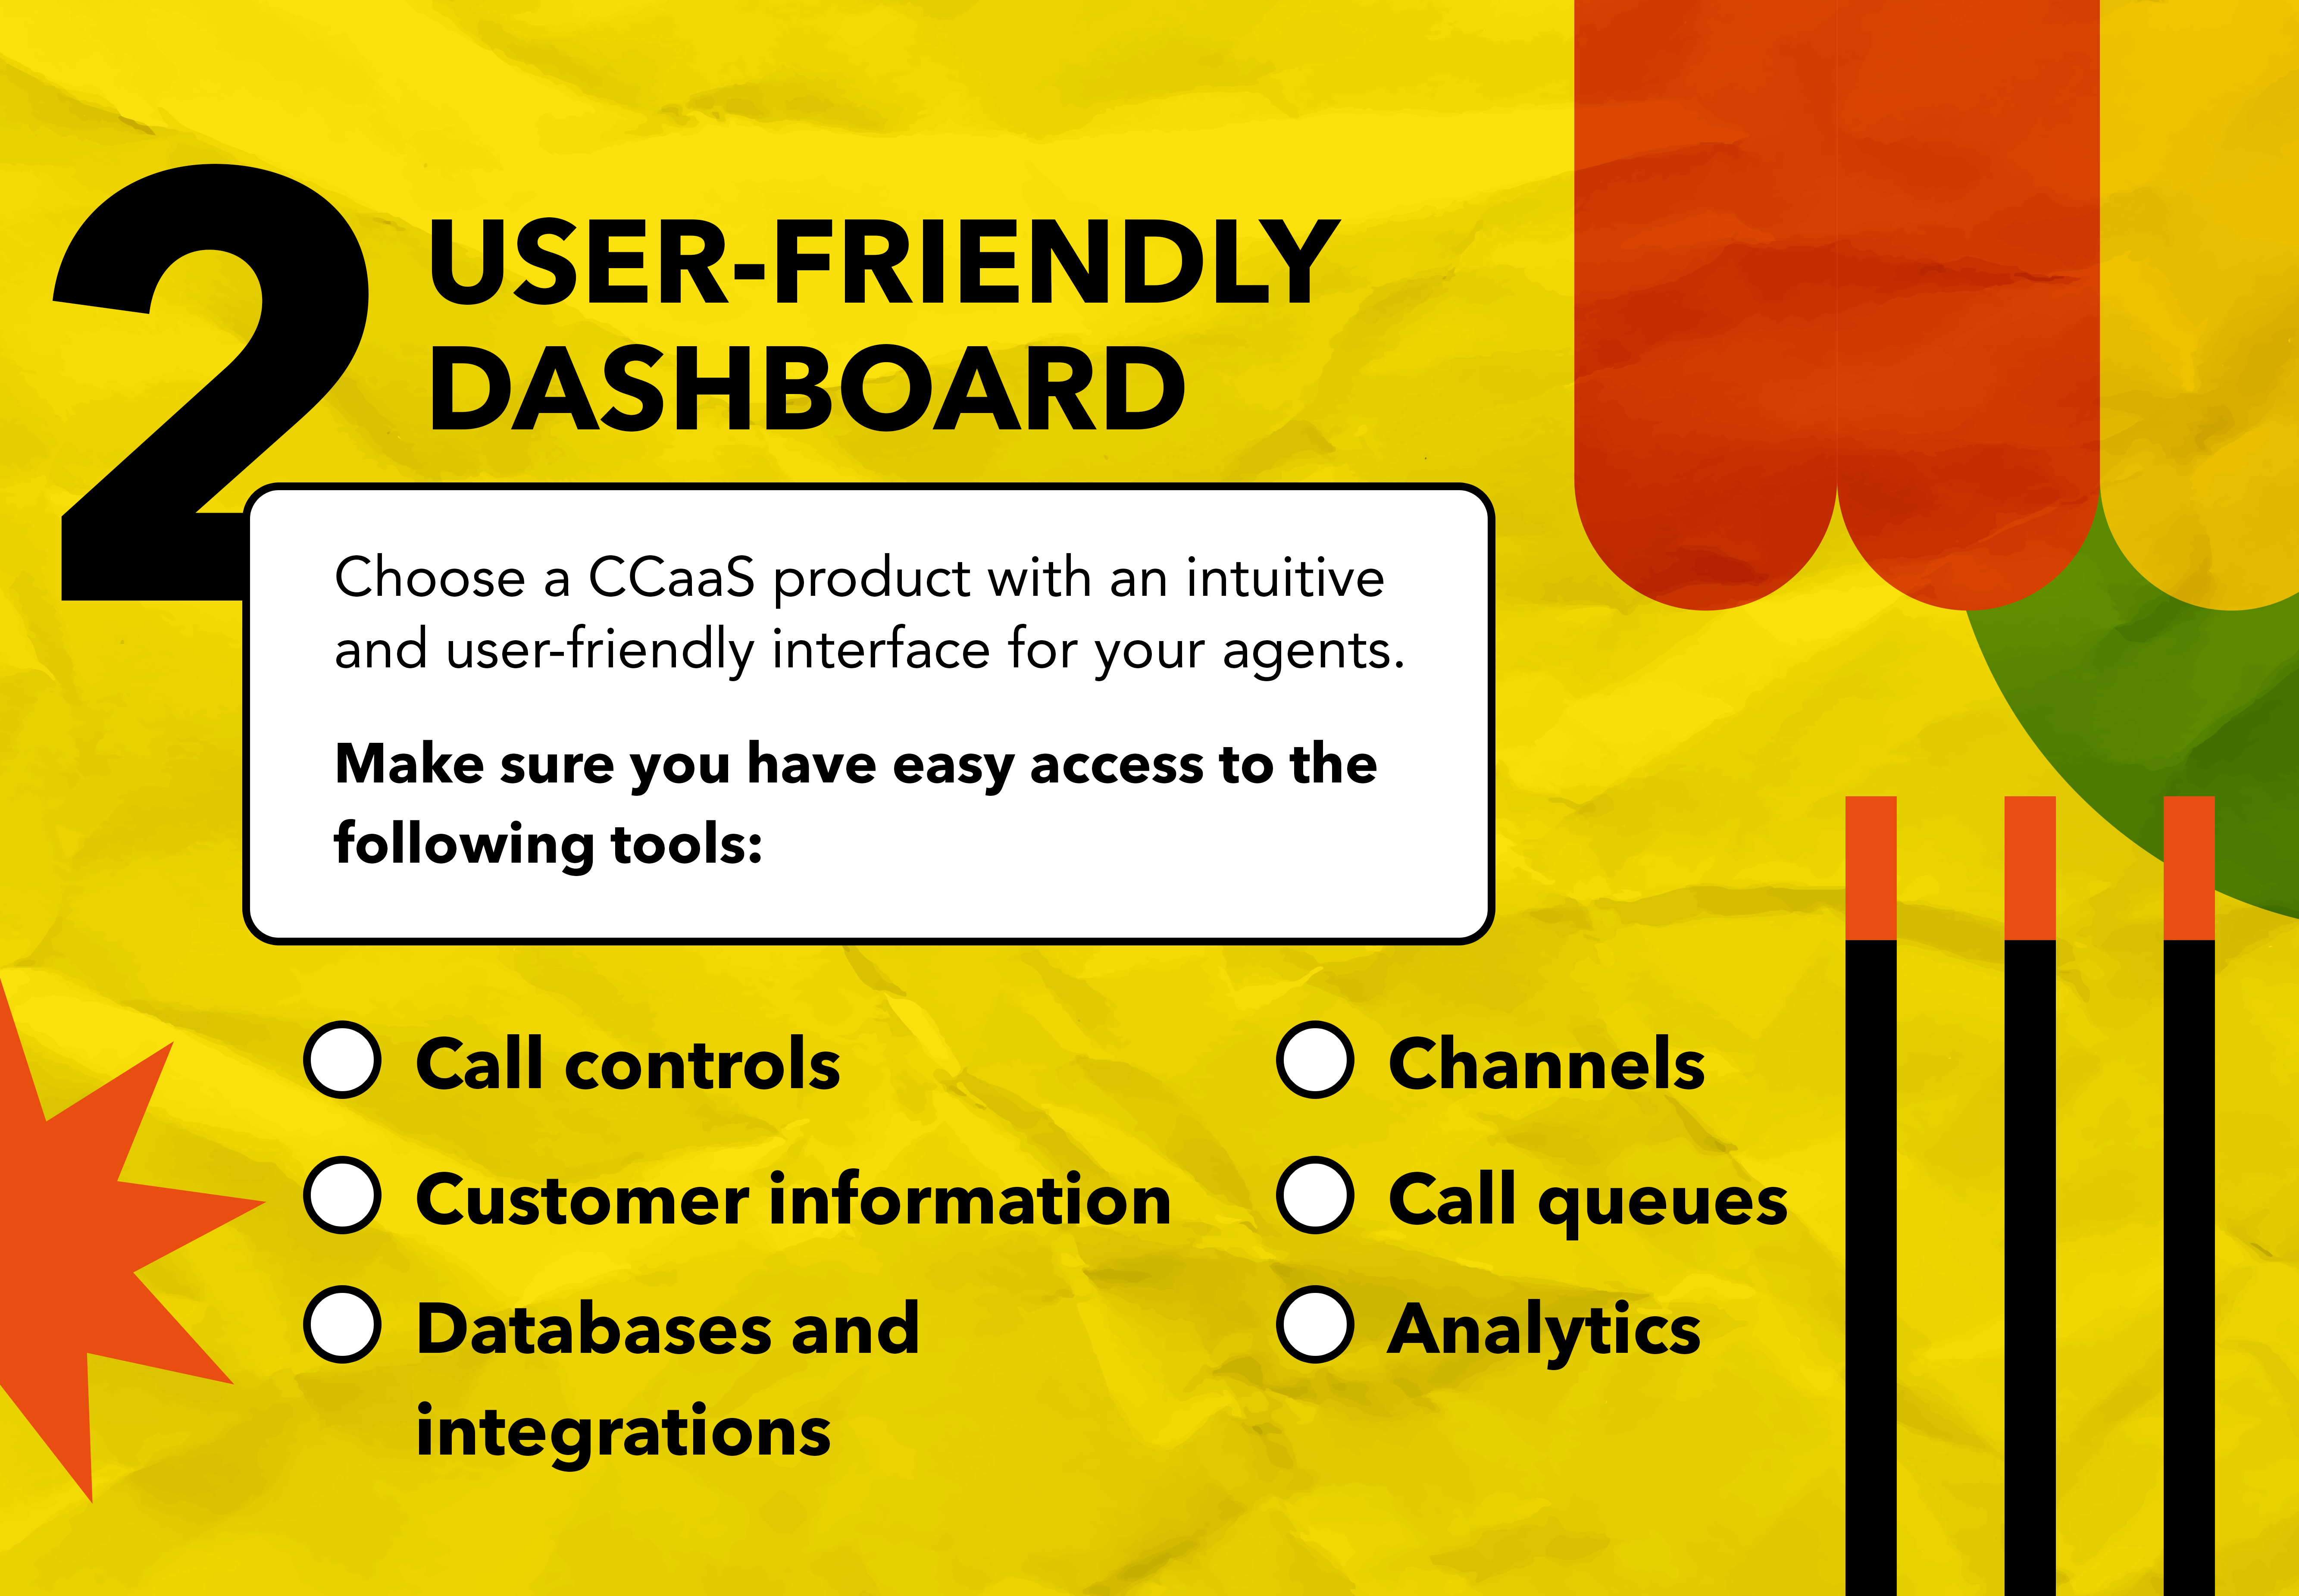 Contact center software requirements checklist - user friendly dashboard